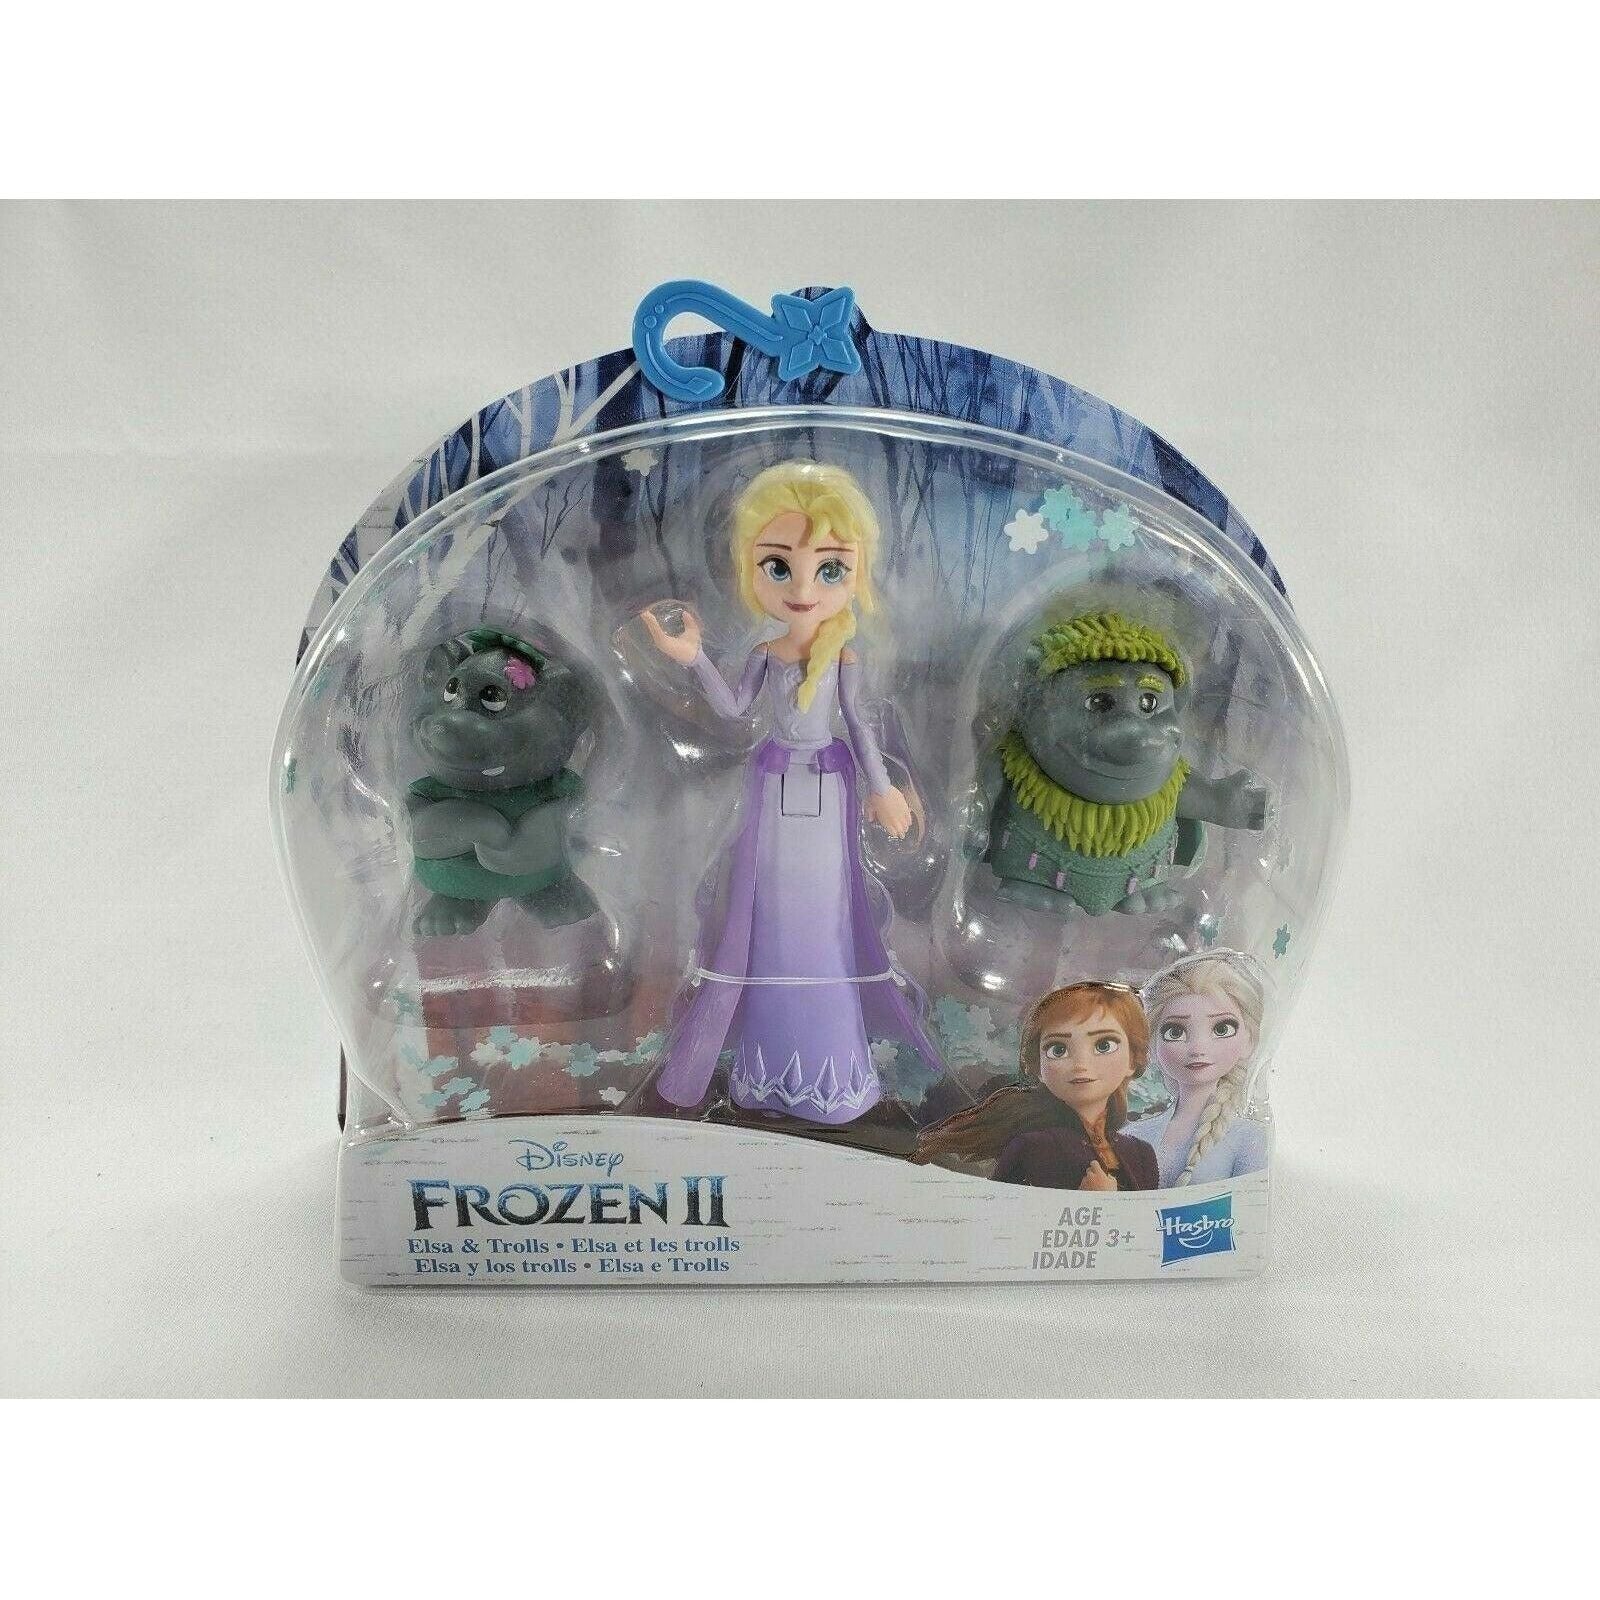 Disney Frozen 2 Elsa Small Doll with Troll Figures - BumbleToys - 5-7 Years, 8-13 Years, Frozen, Girls, Miniature Dolls & Accessories